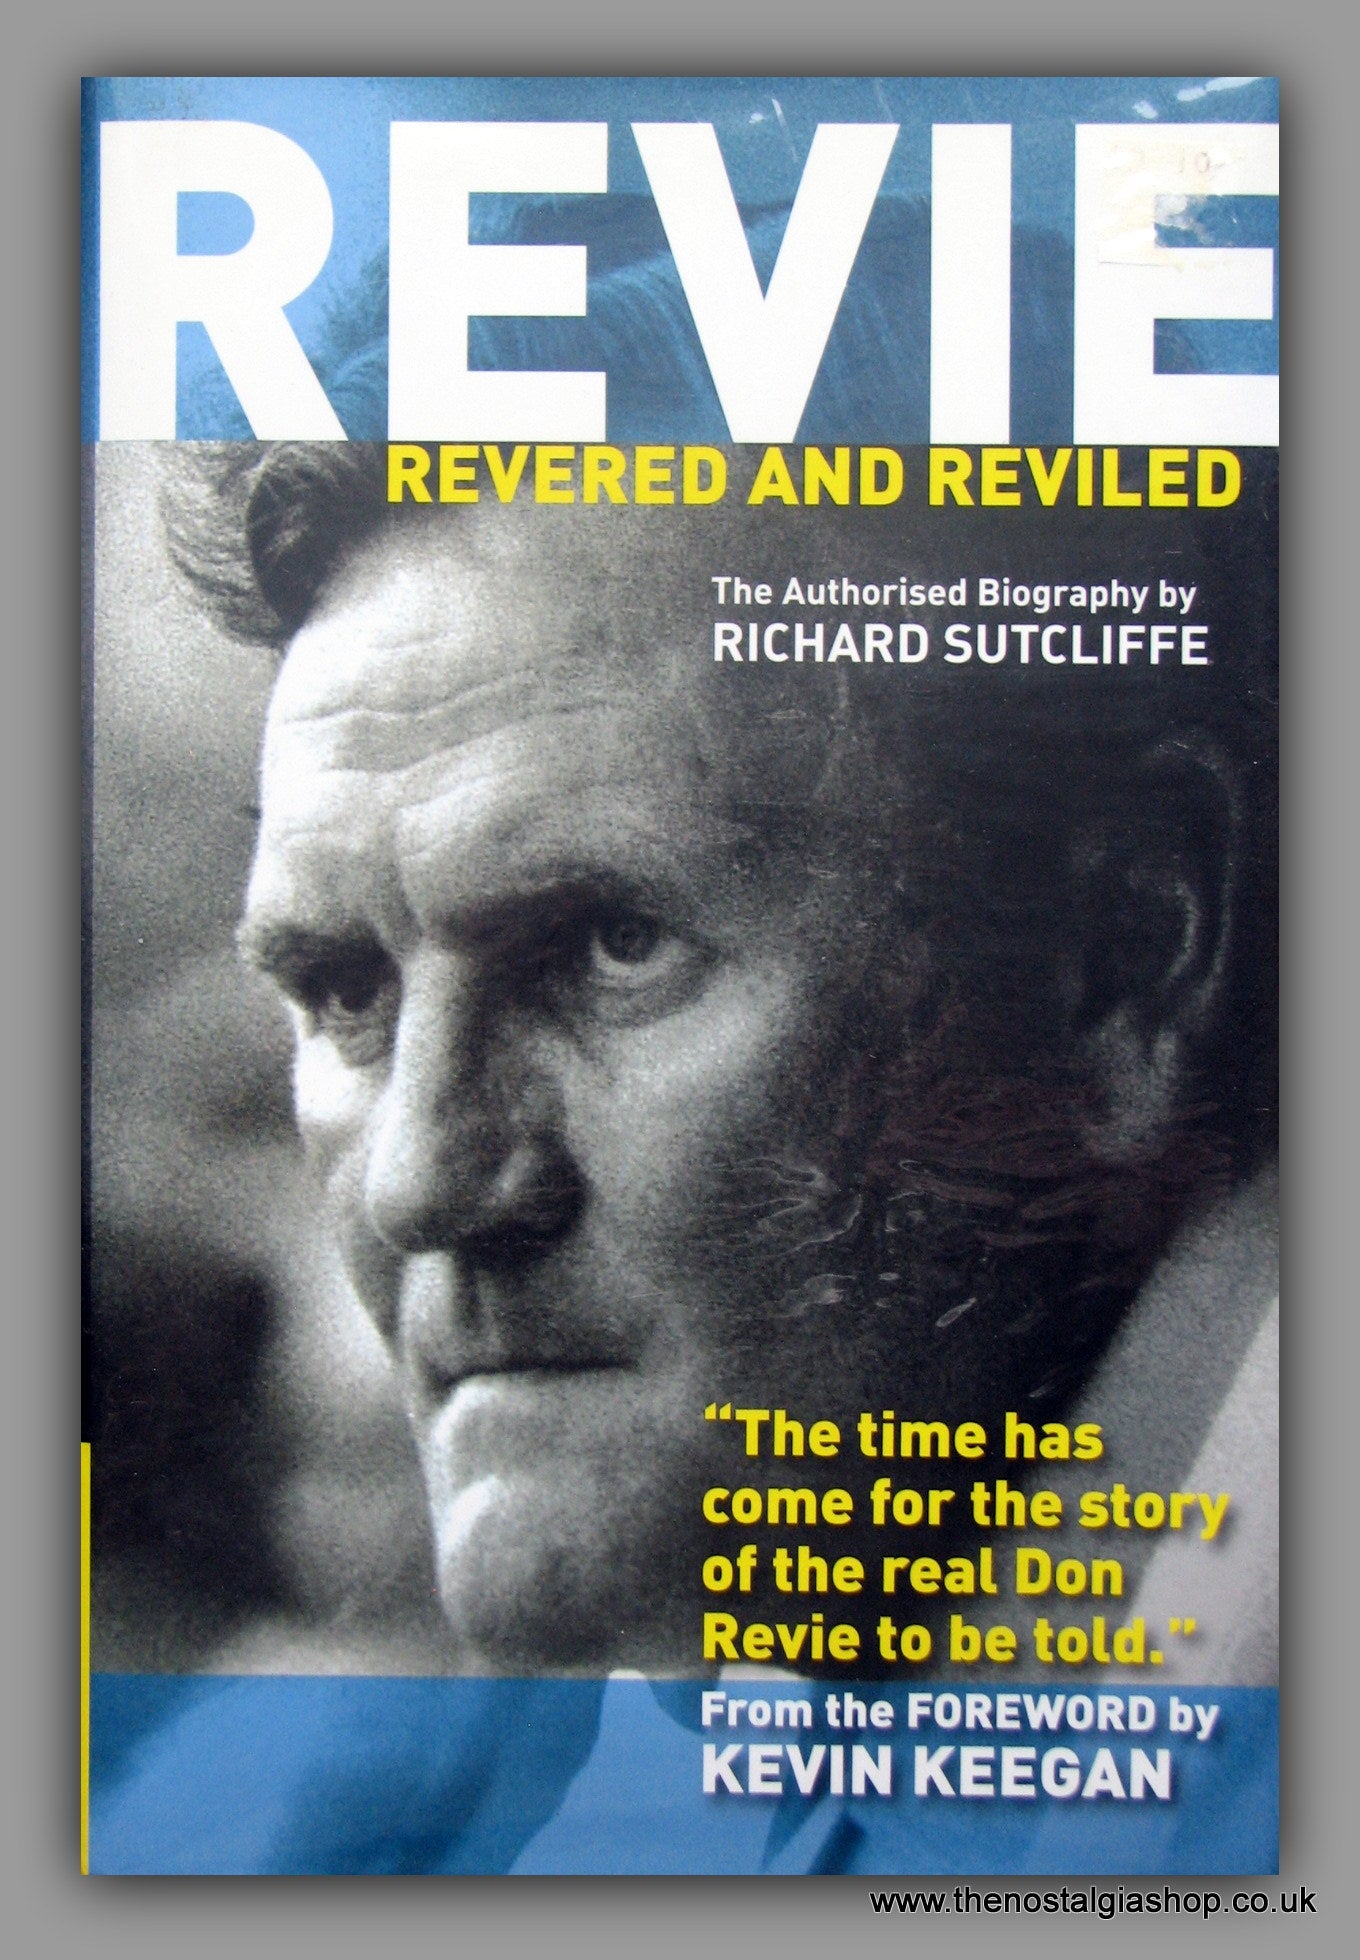 Don Revie. Revered and Reviled Biography. 2010 (ref b136)